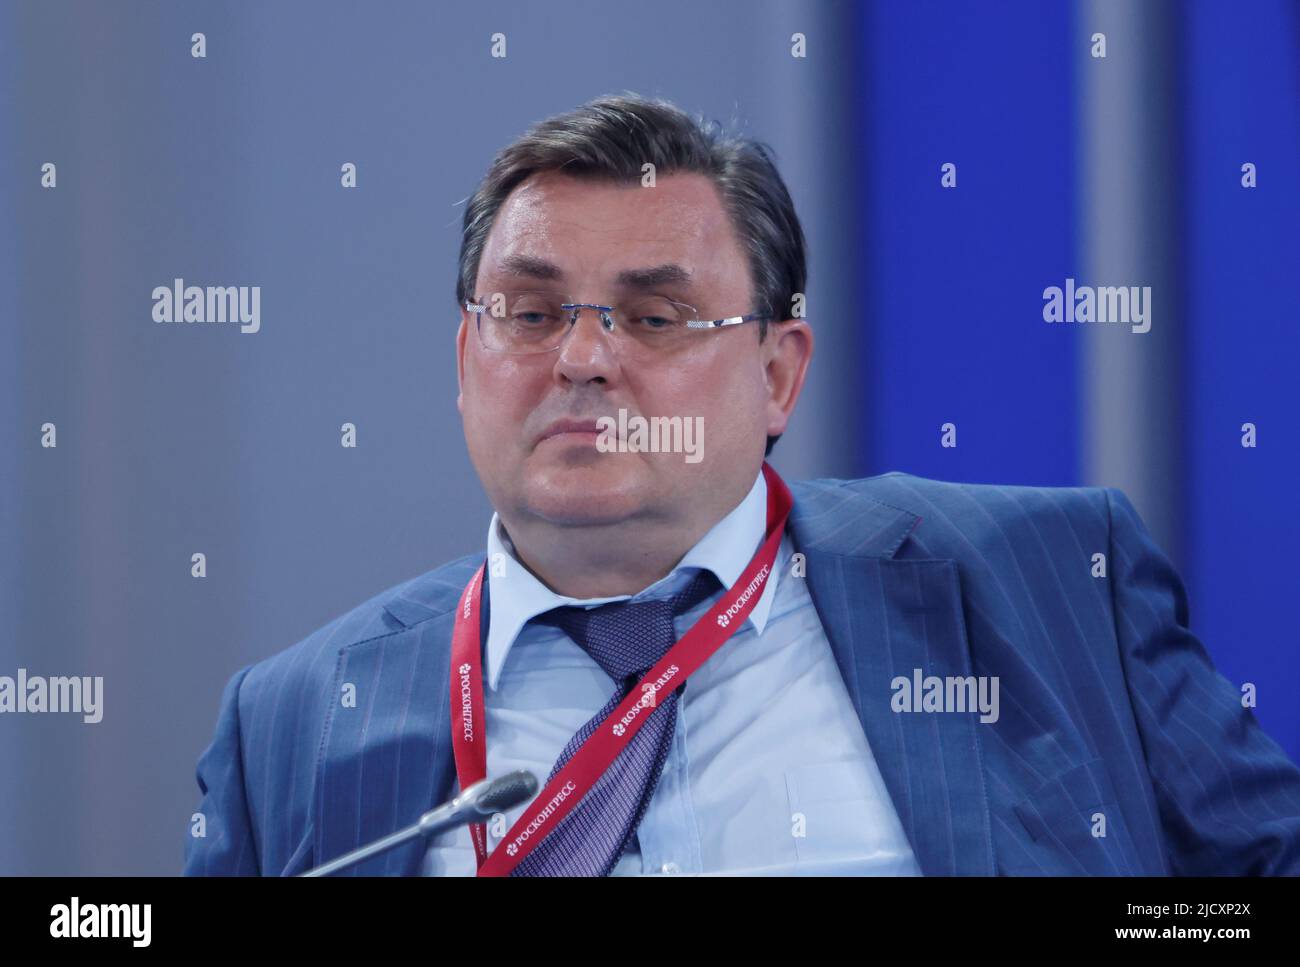 Konstantin Chuychenko, Russia's Minister of Justice, attends a session of the St. Petersburg International Economic Forum (SPIEF) in Saint Petersburg, Russia June 16, 2022. REUTERS/Maxim Shemetov Stock Photo